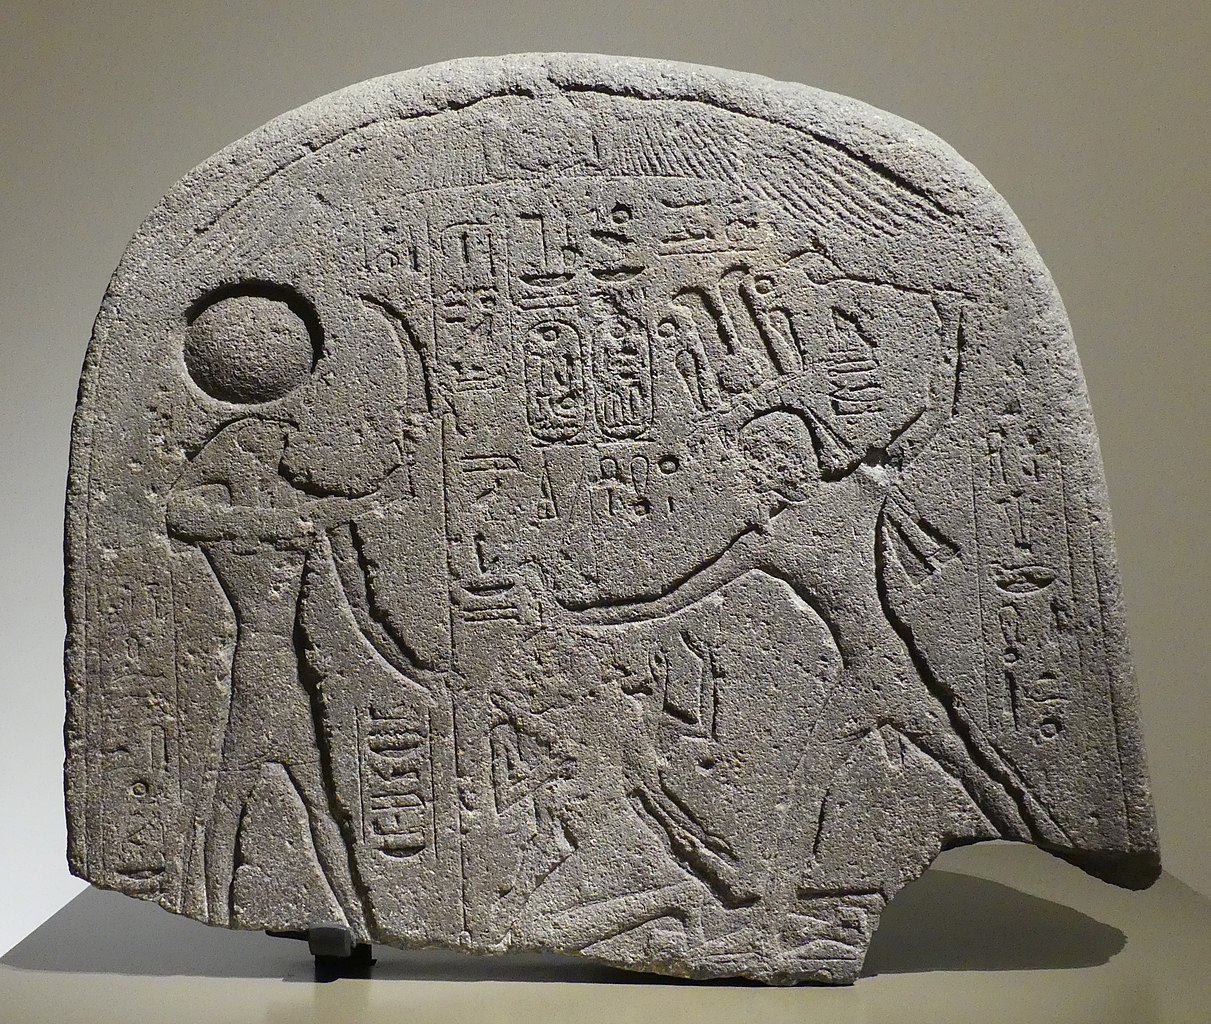 Egyptian Plaque from the city of Tyre in Little Asia